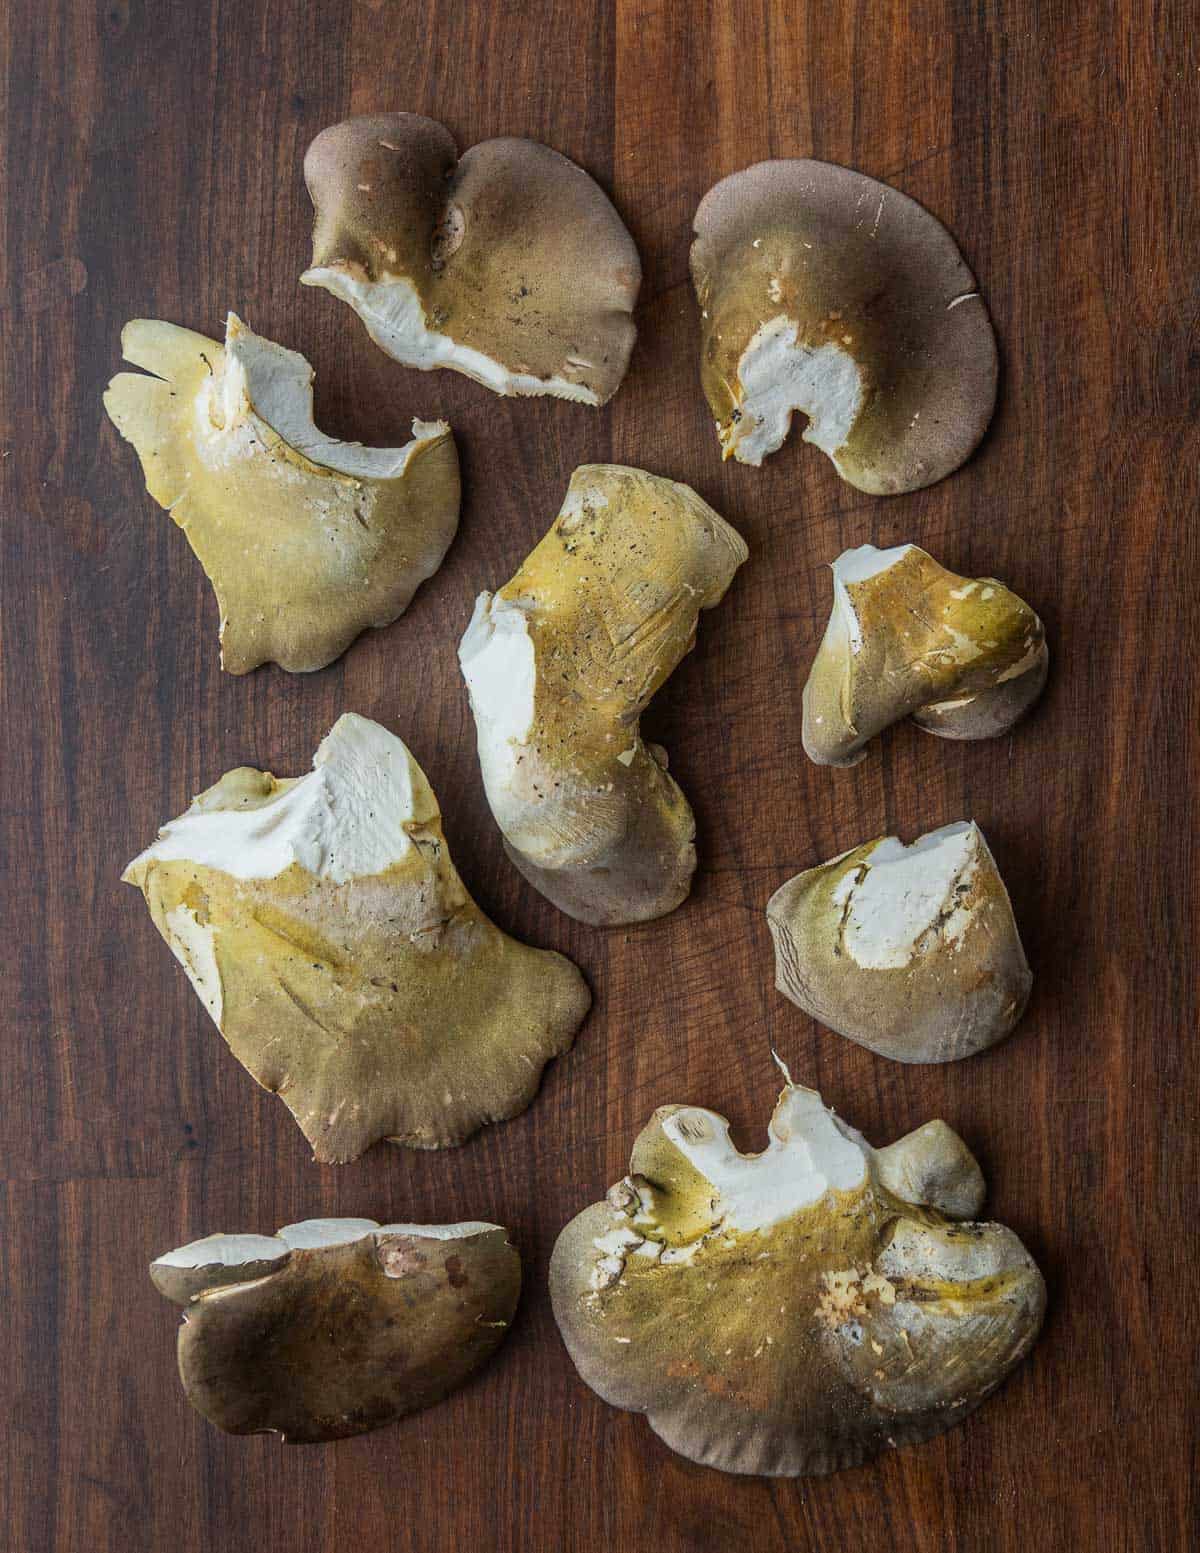 A top down image of many late fall oyster mushrooms showing variation in cap color. 